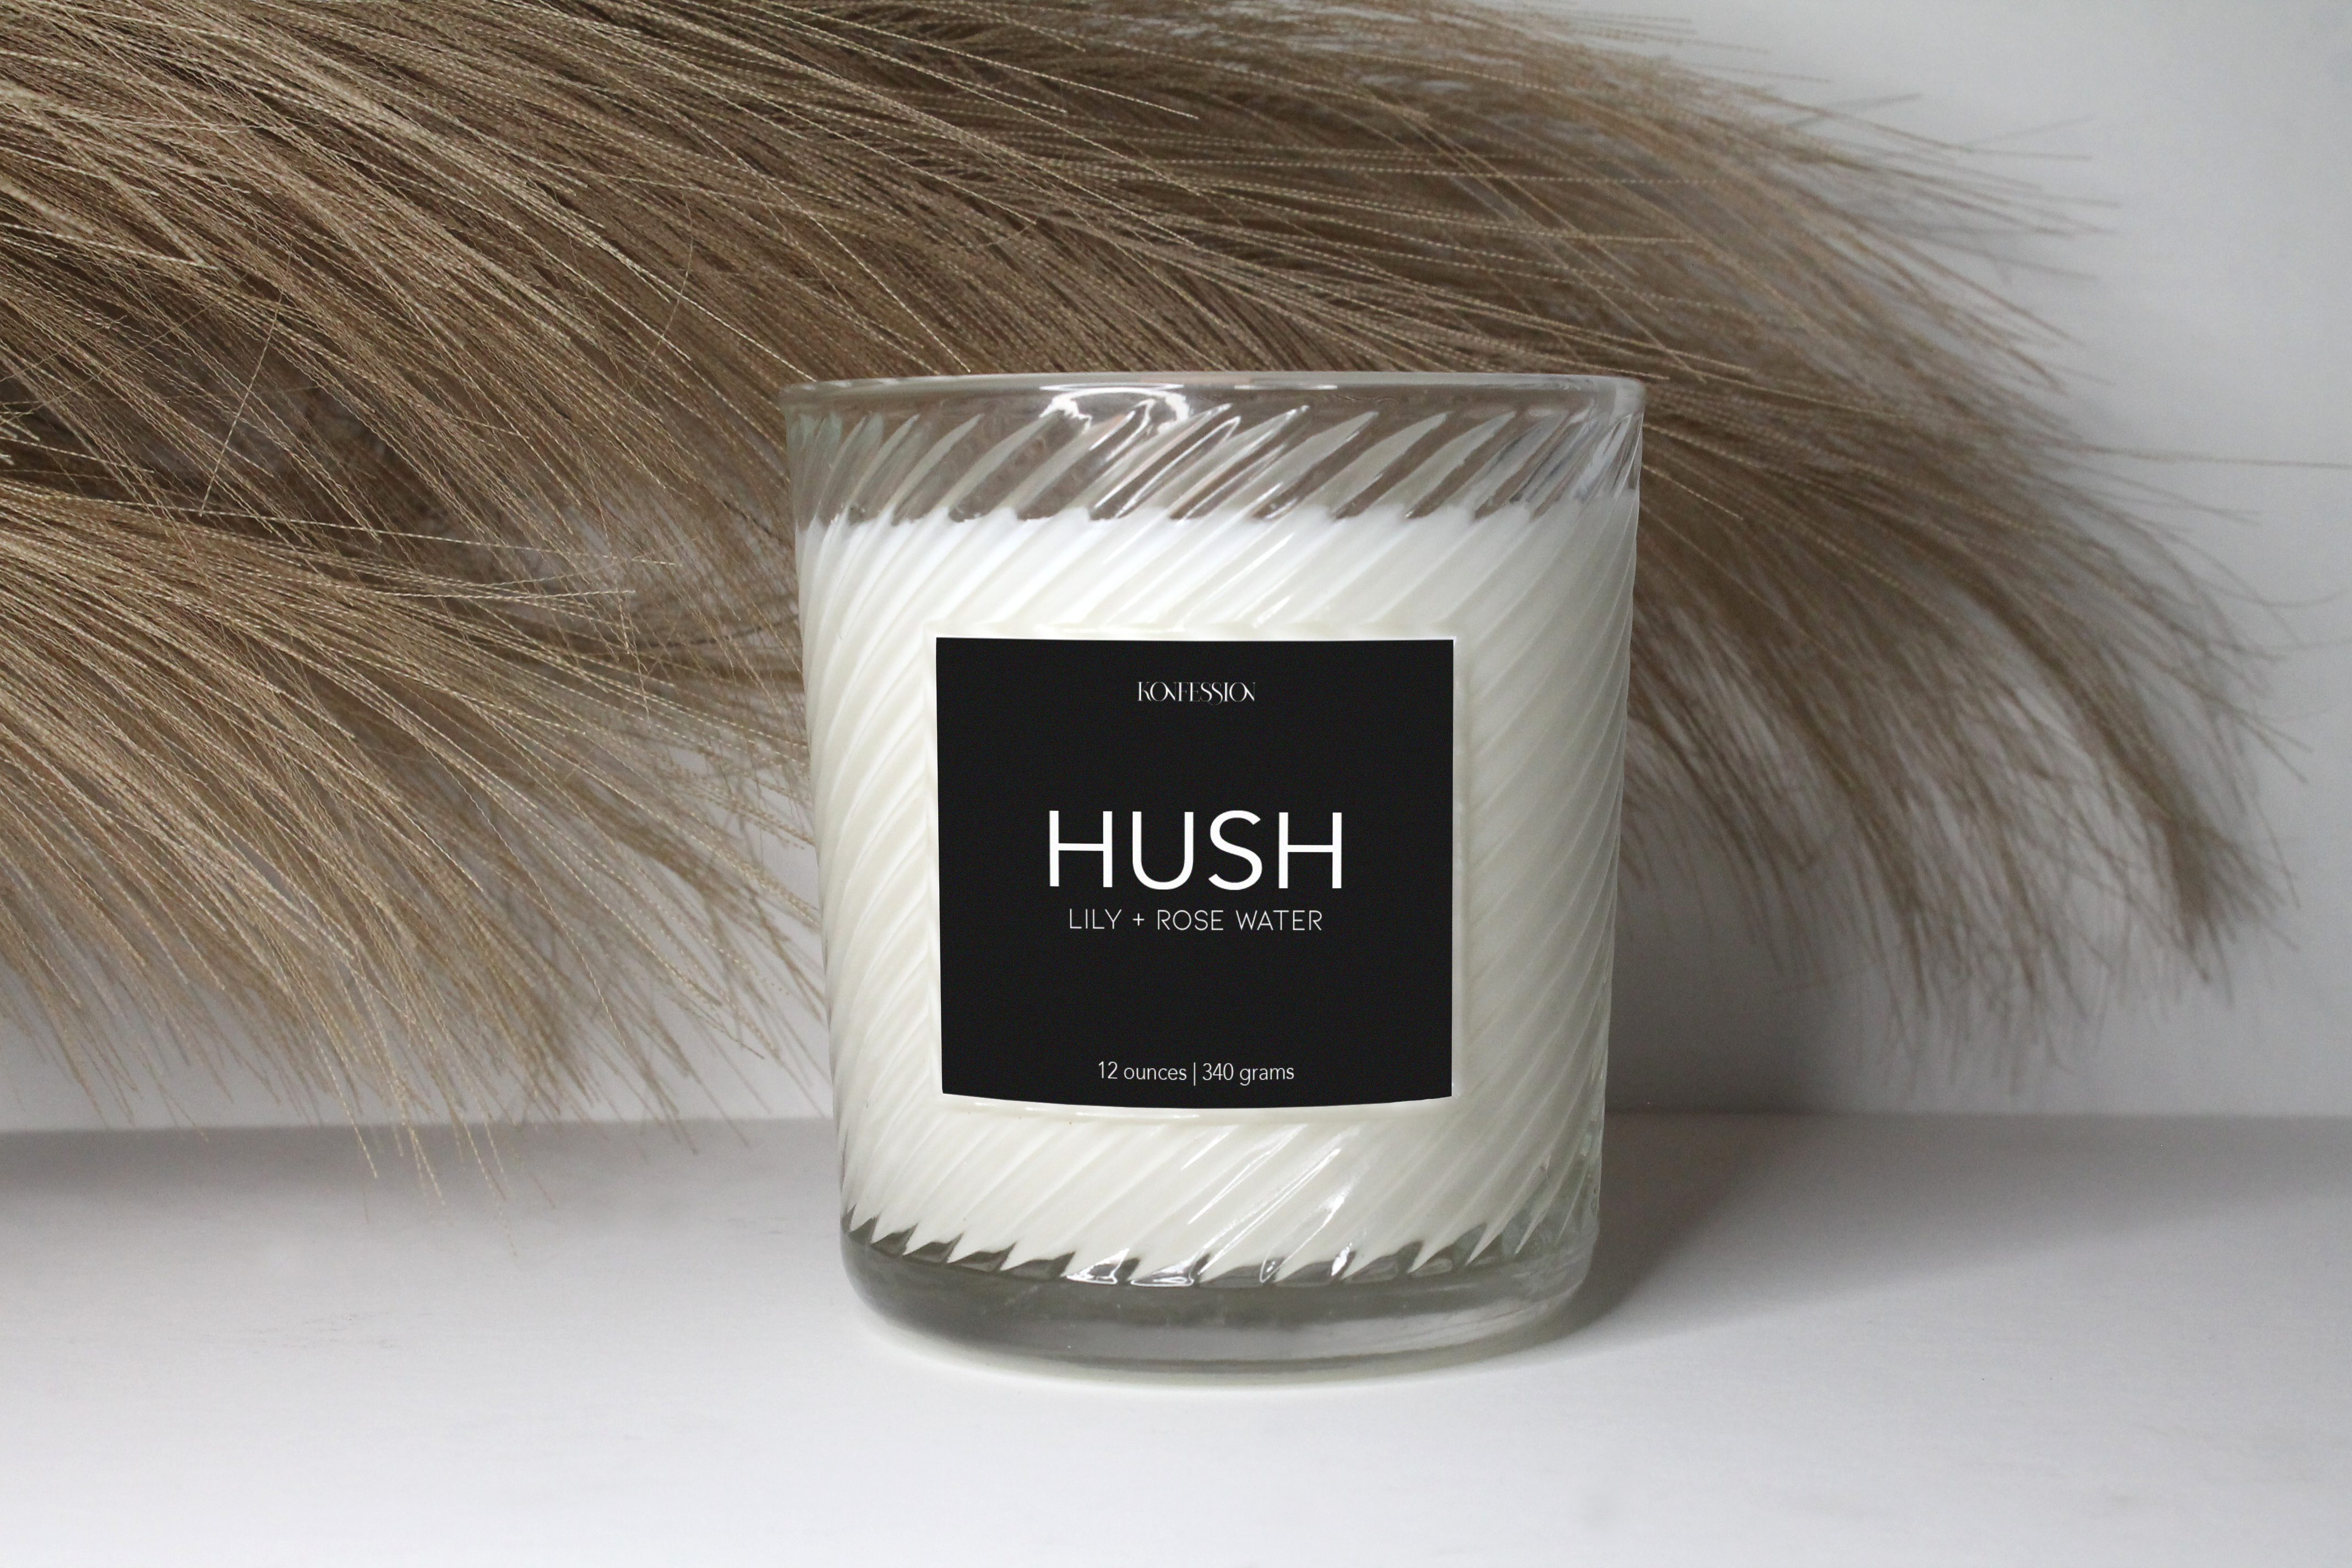 Our candles are made with 100% natural soy wax. The candle is a clear rigged class with a black lable and white writing. 